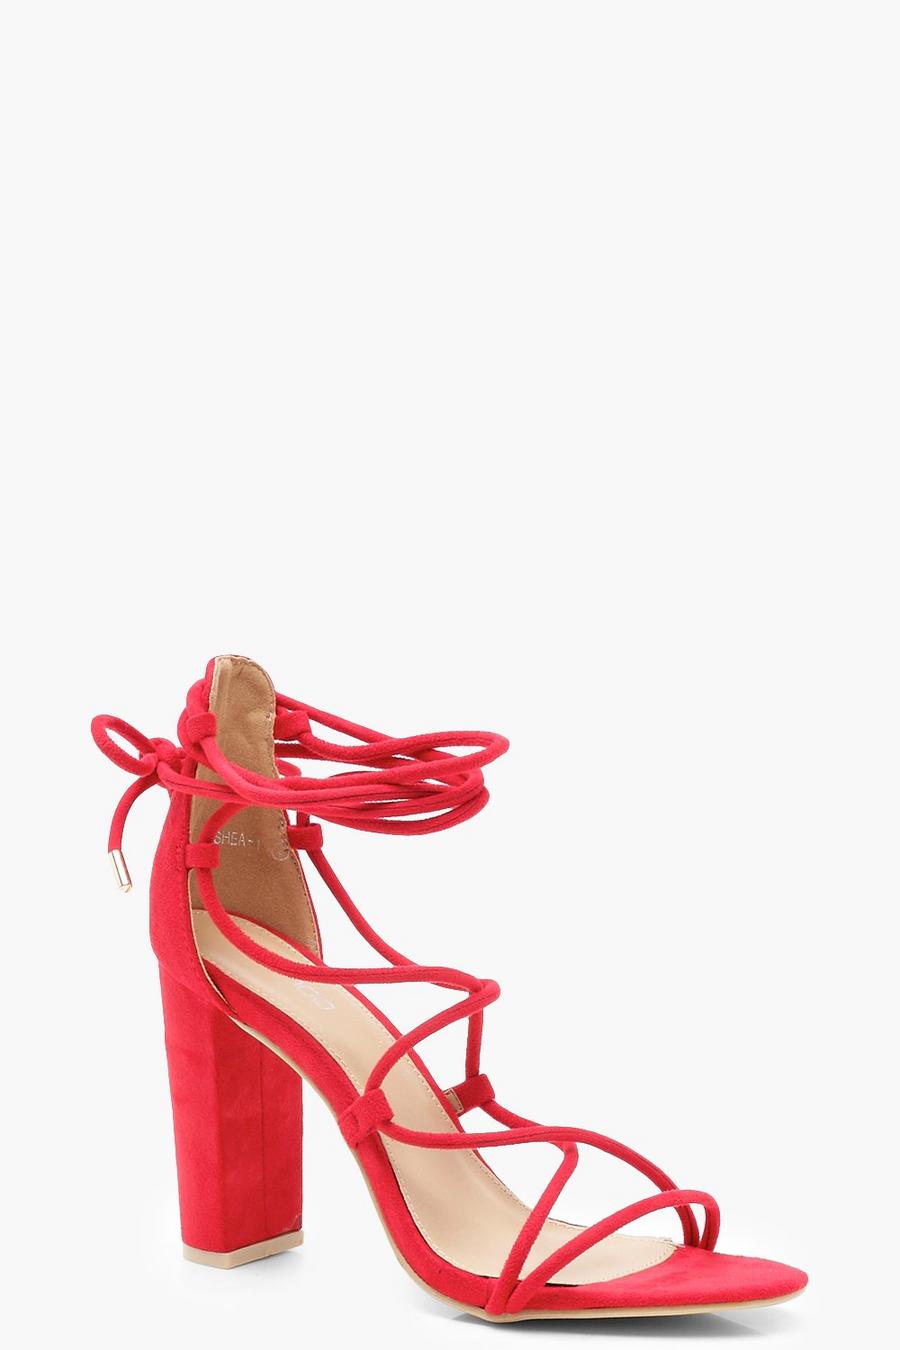 Cage Lace Up Block Heels image number 1